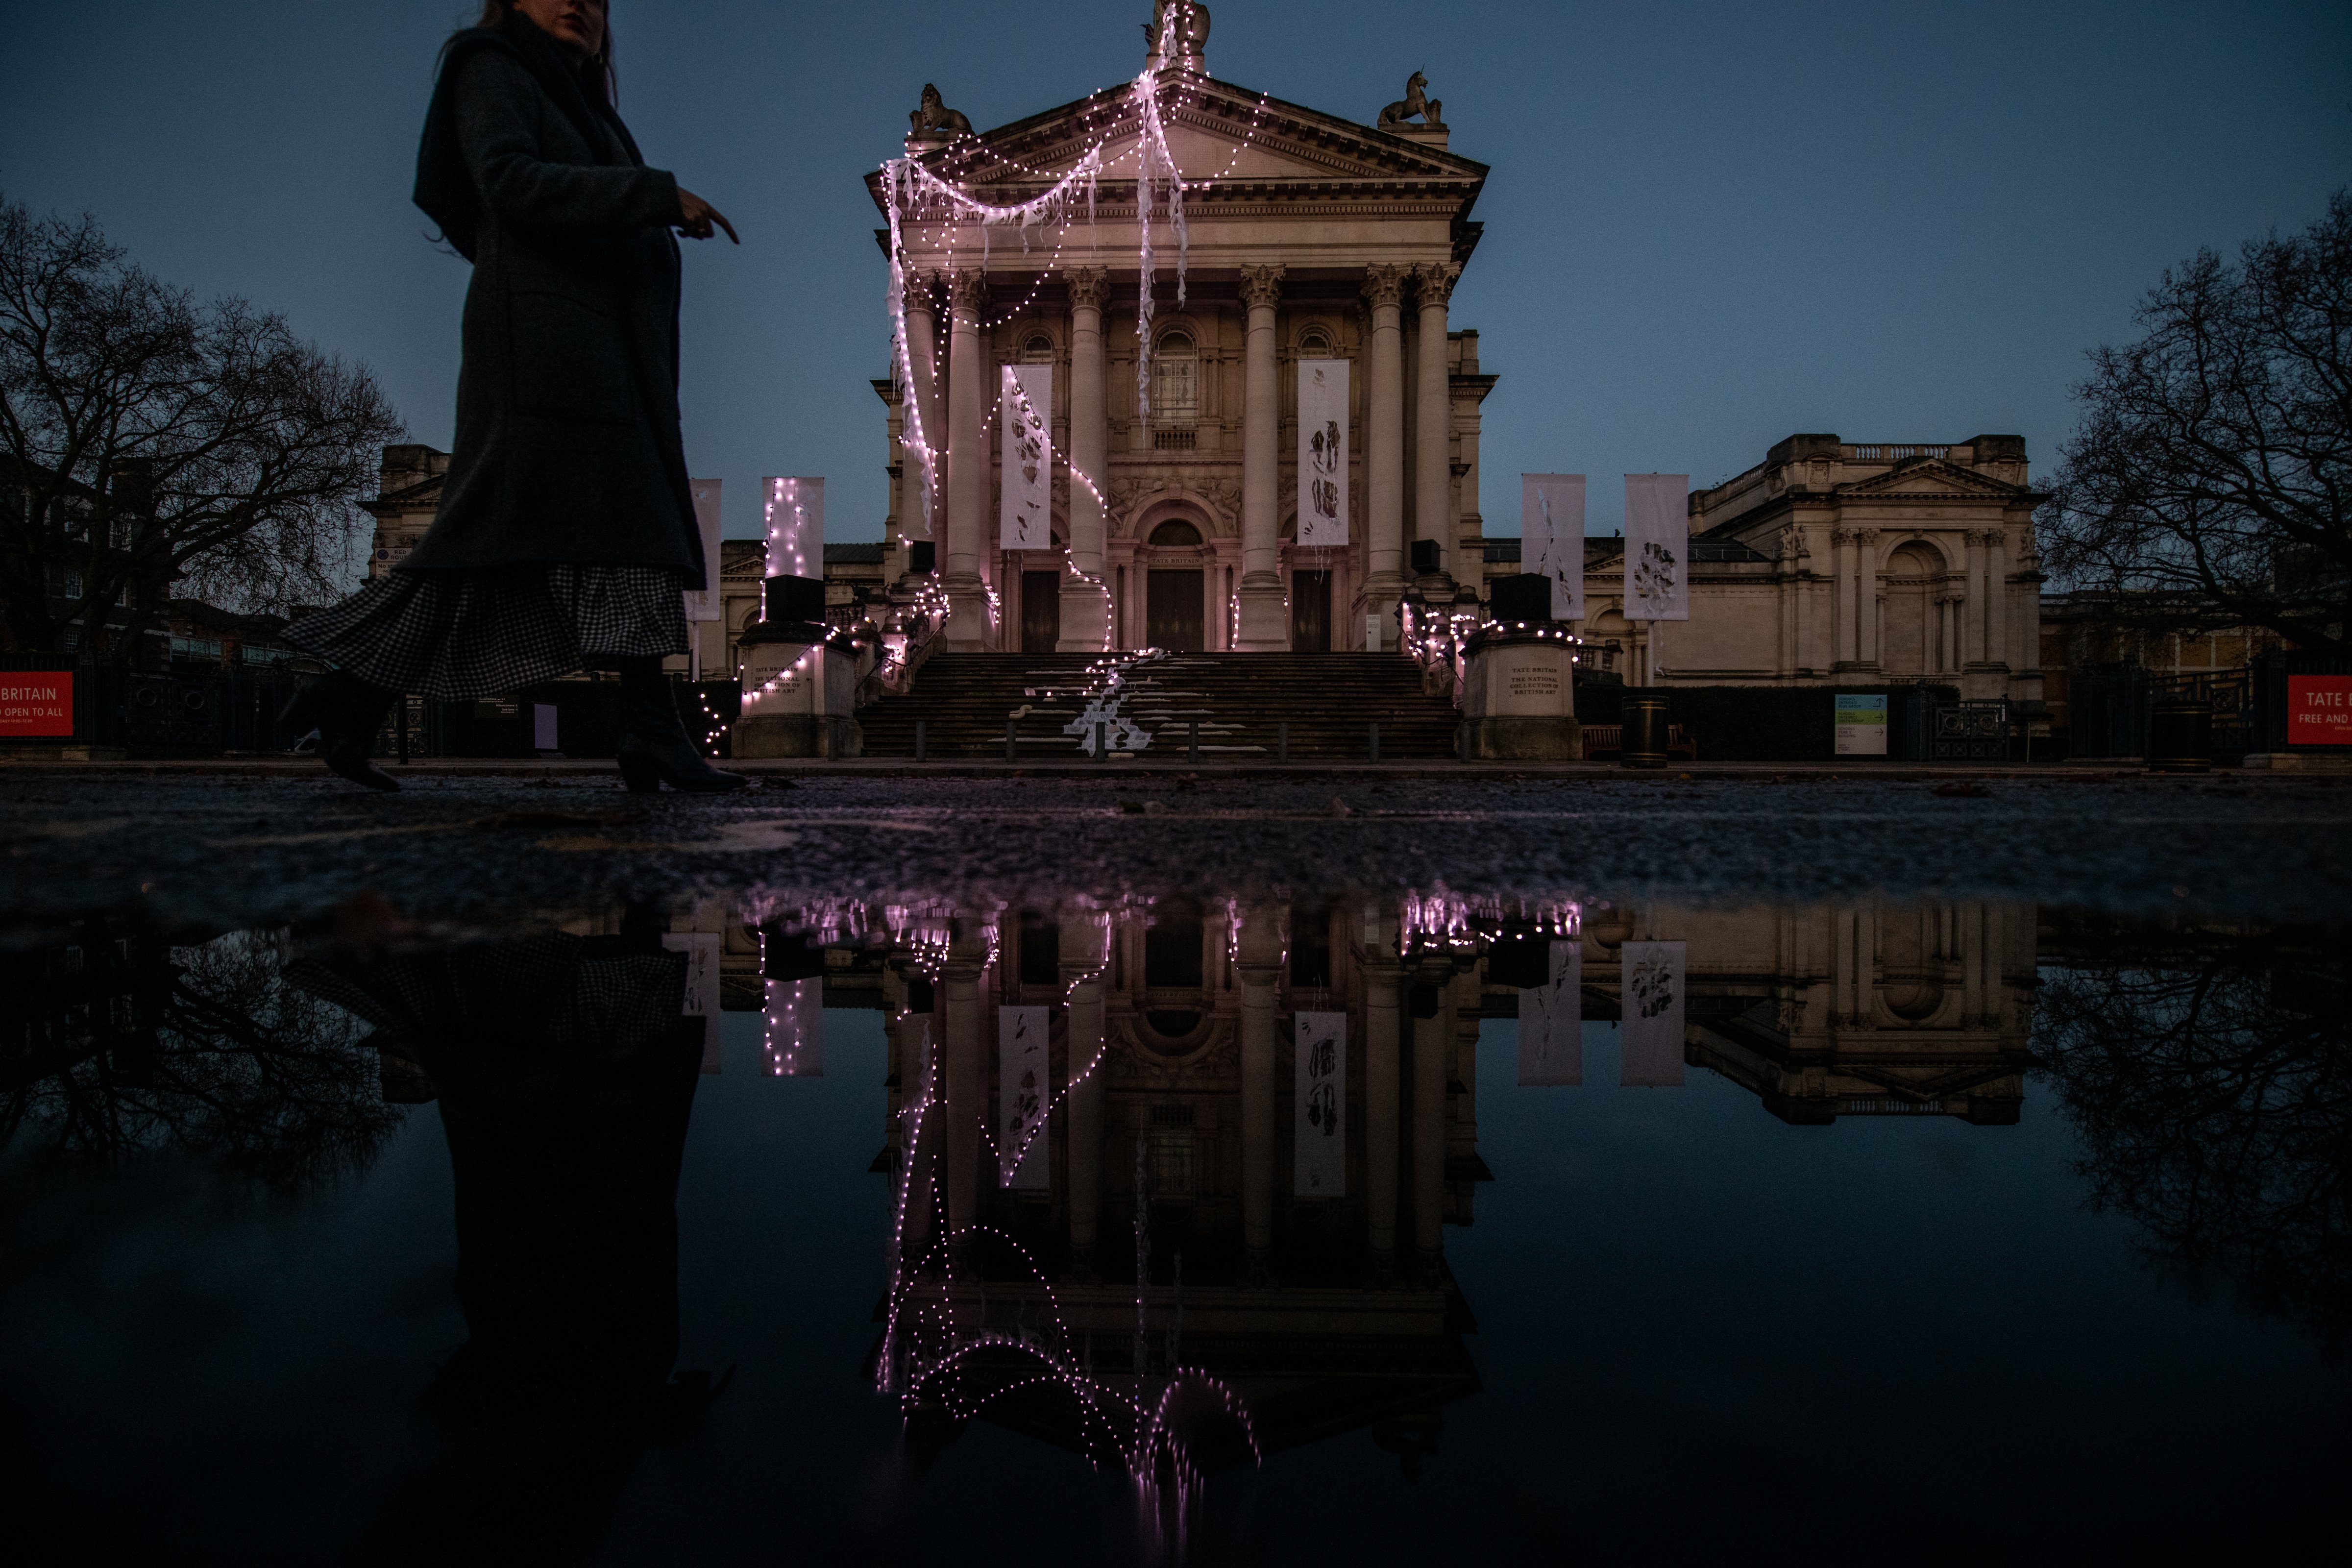 A sculptural installation by artist Anne Hardy is seen on the exterior of Tate Britain on Nov. 29, 2019 in London, England. (Chris J Ratcliffe—Getty Images)